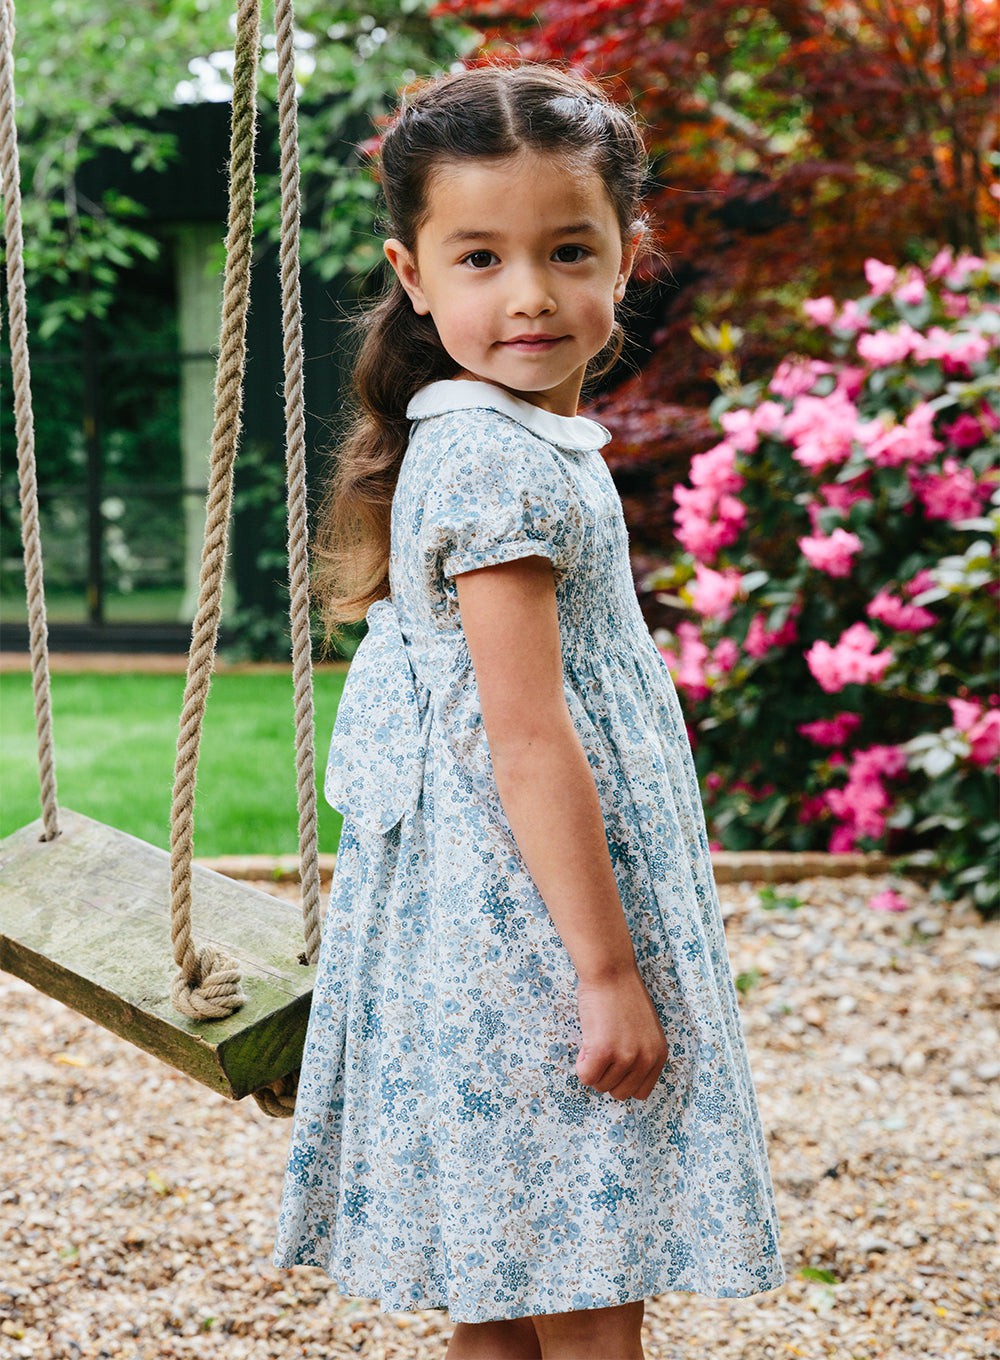 The Trotters Dress Shop | Dresses for Girls and Baby Girls